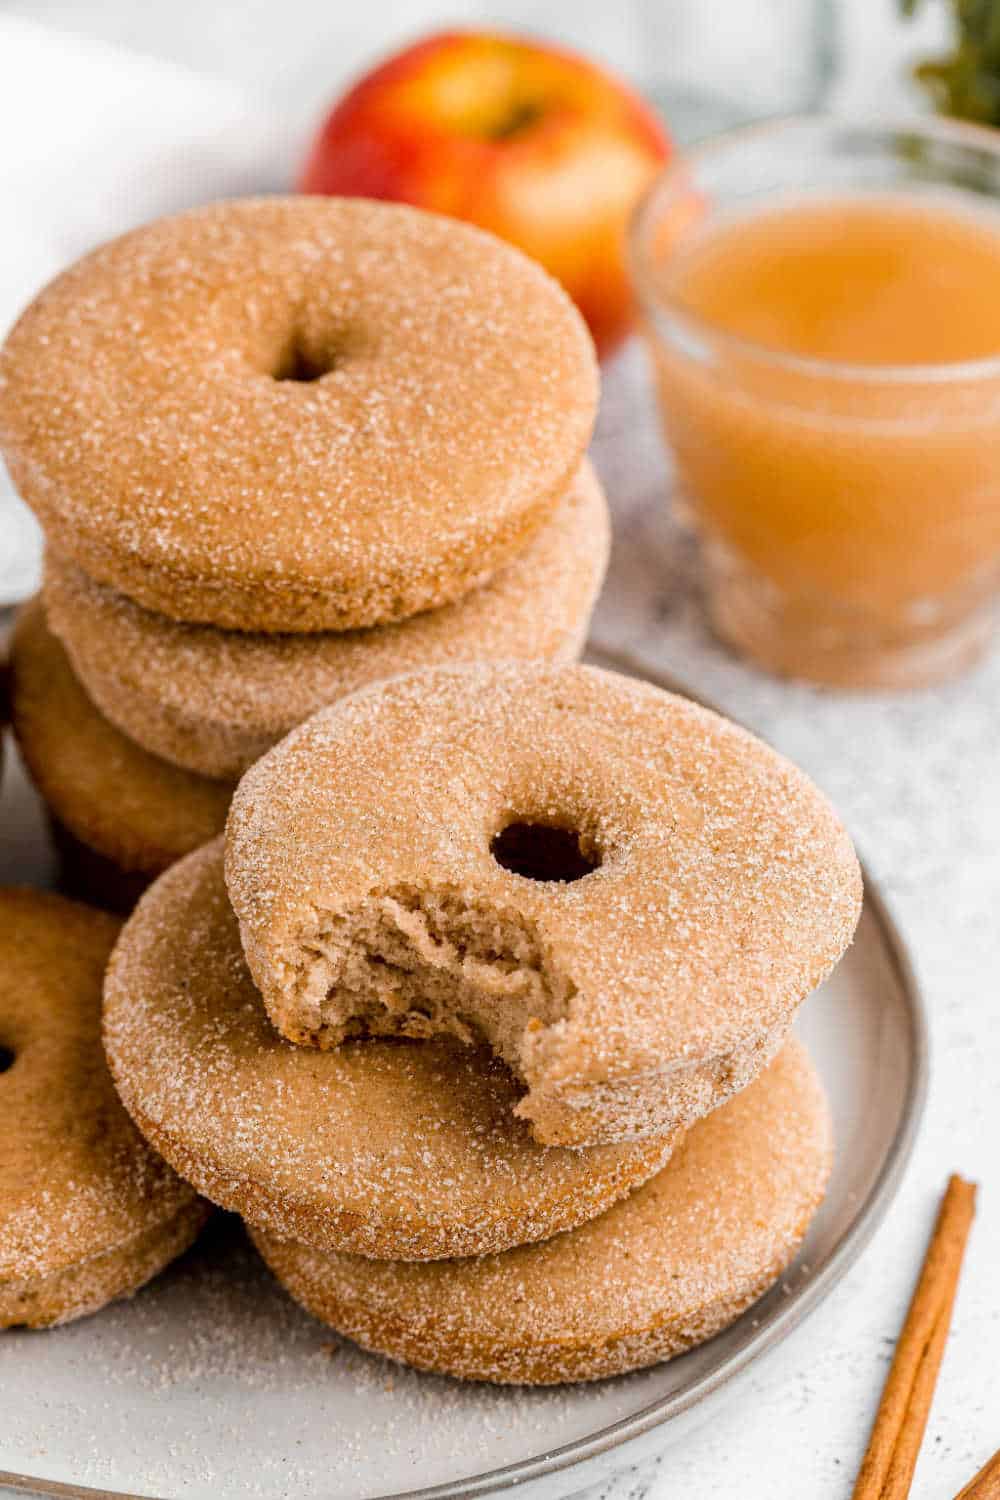 baked apple cider donuts on a plate with a bite out of one donut